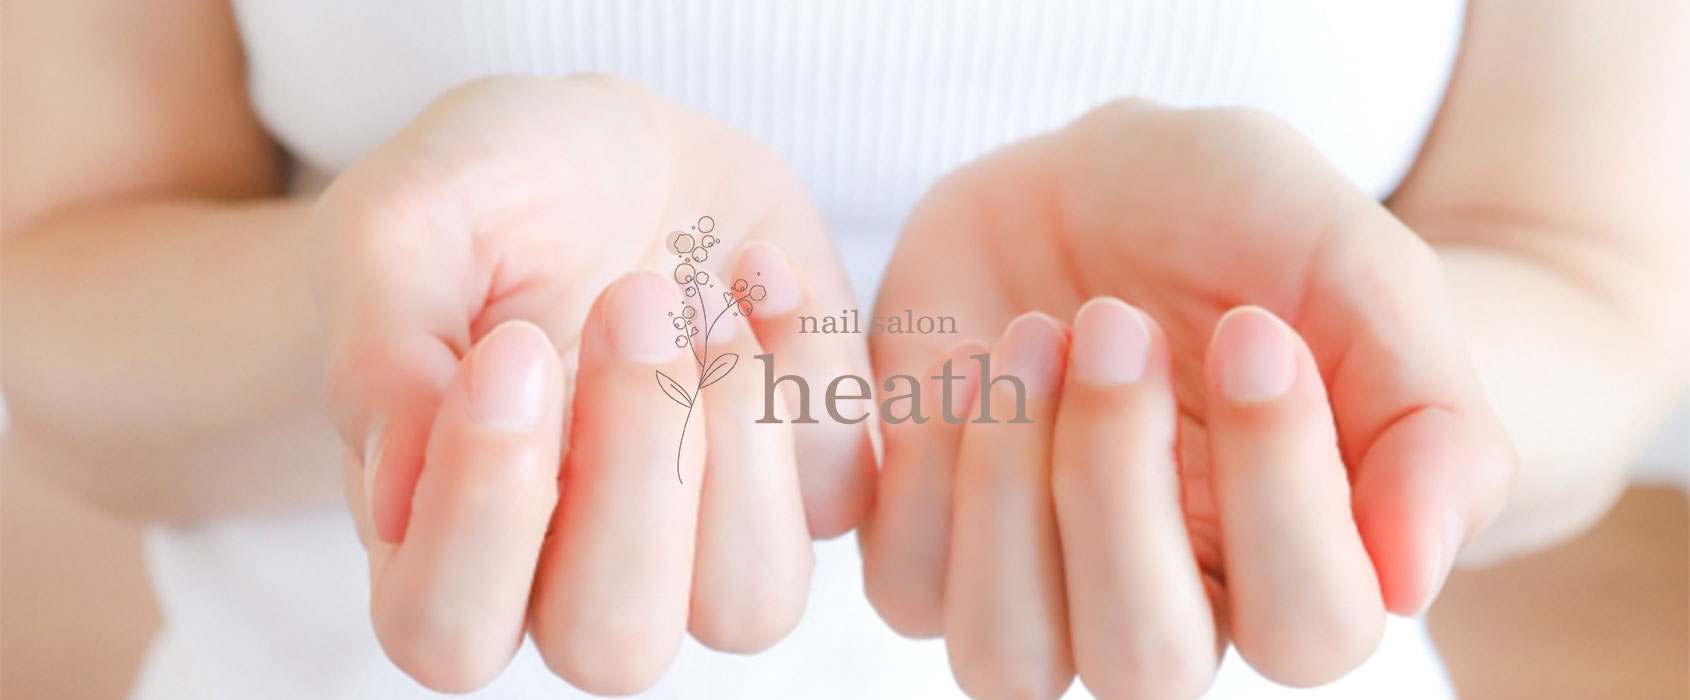 Heath Nail Design - Operating Hours - wide 6